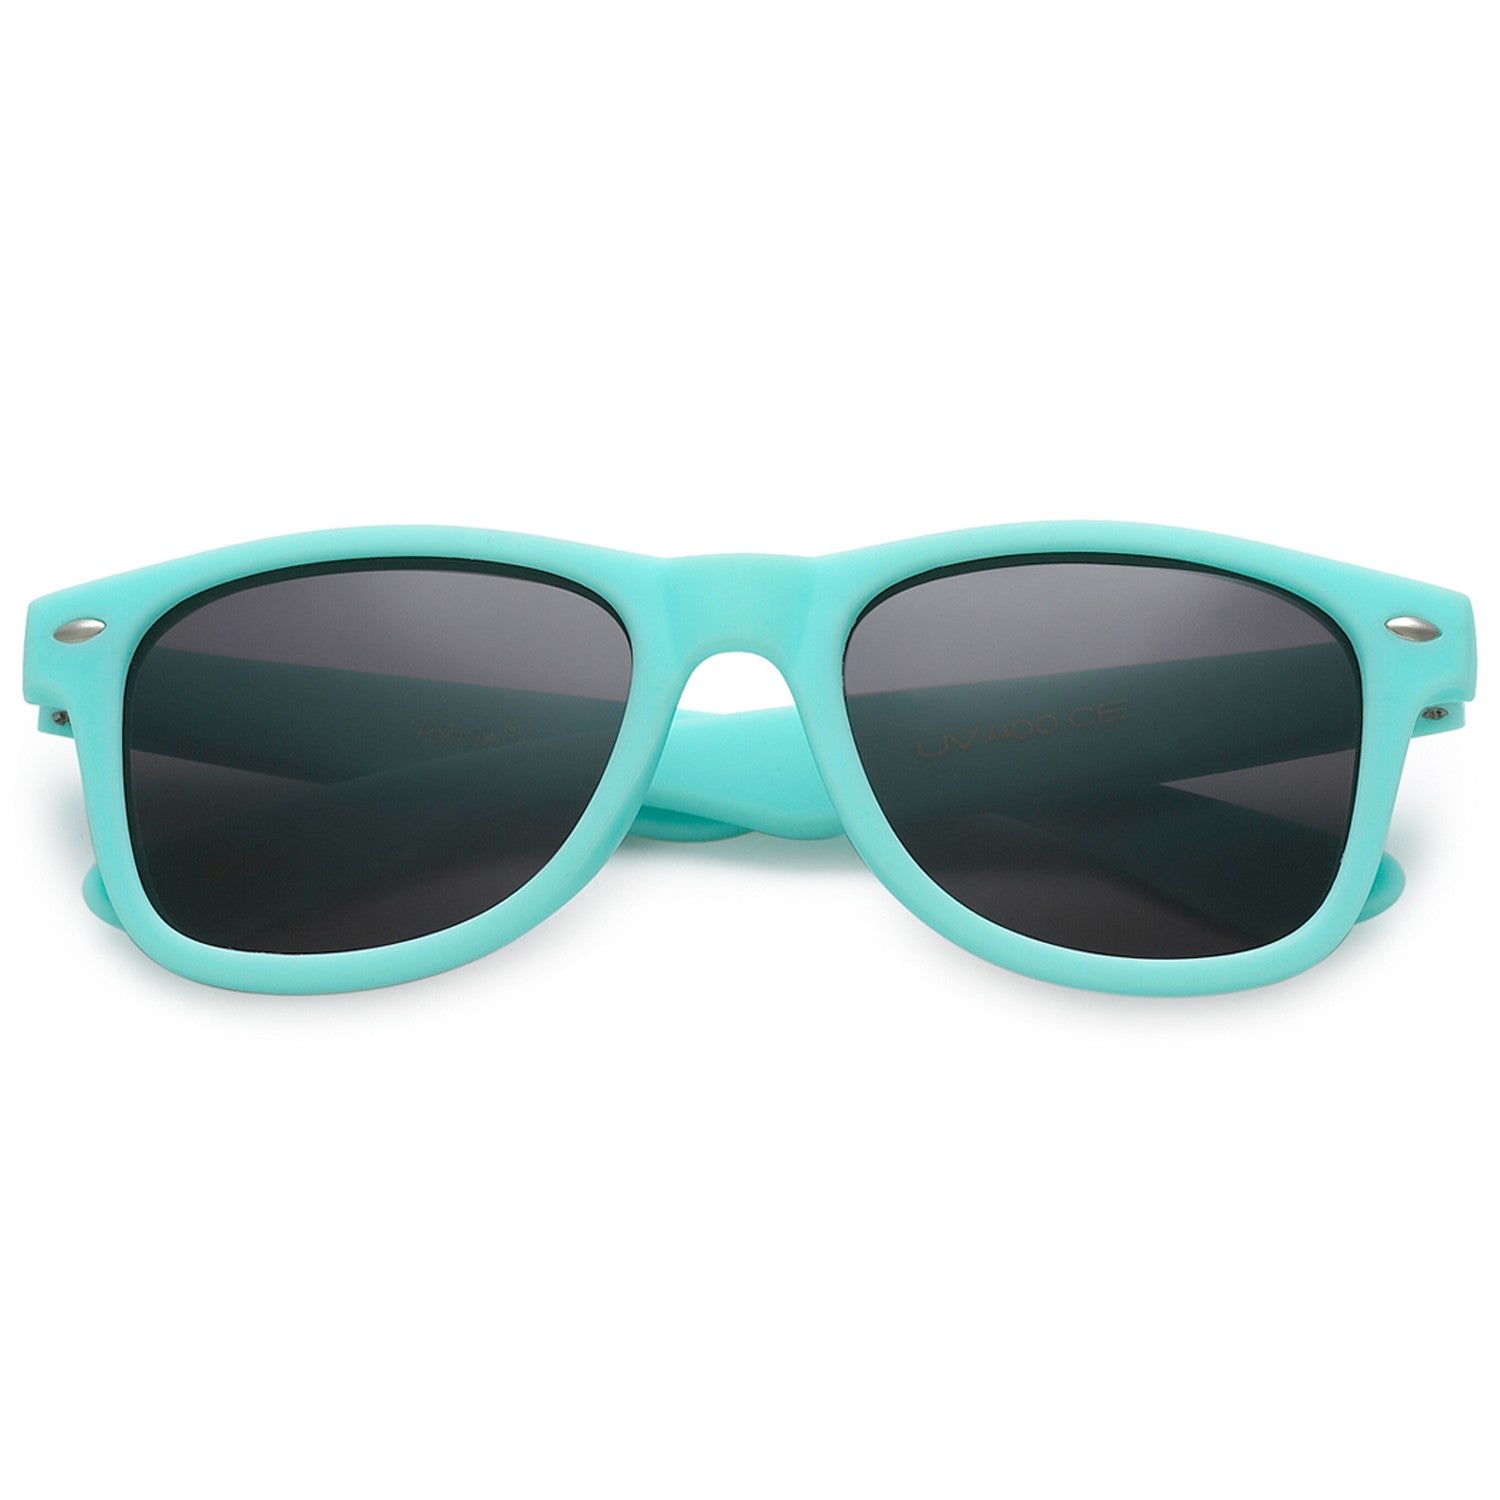 Polarspex Polarized 80's Retro Style Kids Sunglasses with Rubberized Aqua Teal Frames and Polarized Smoke Lenses for Boys and Girls